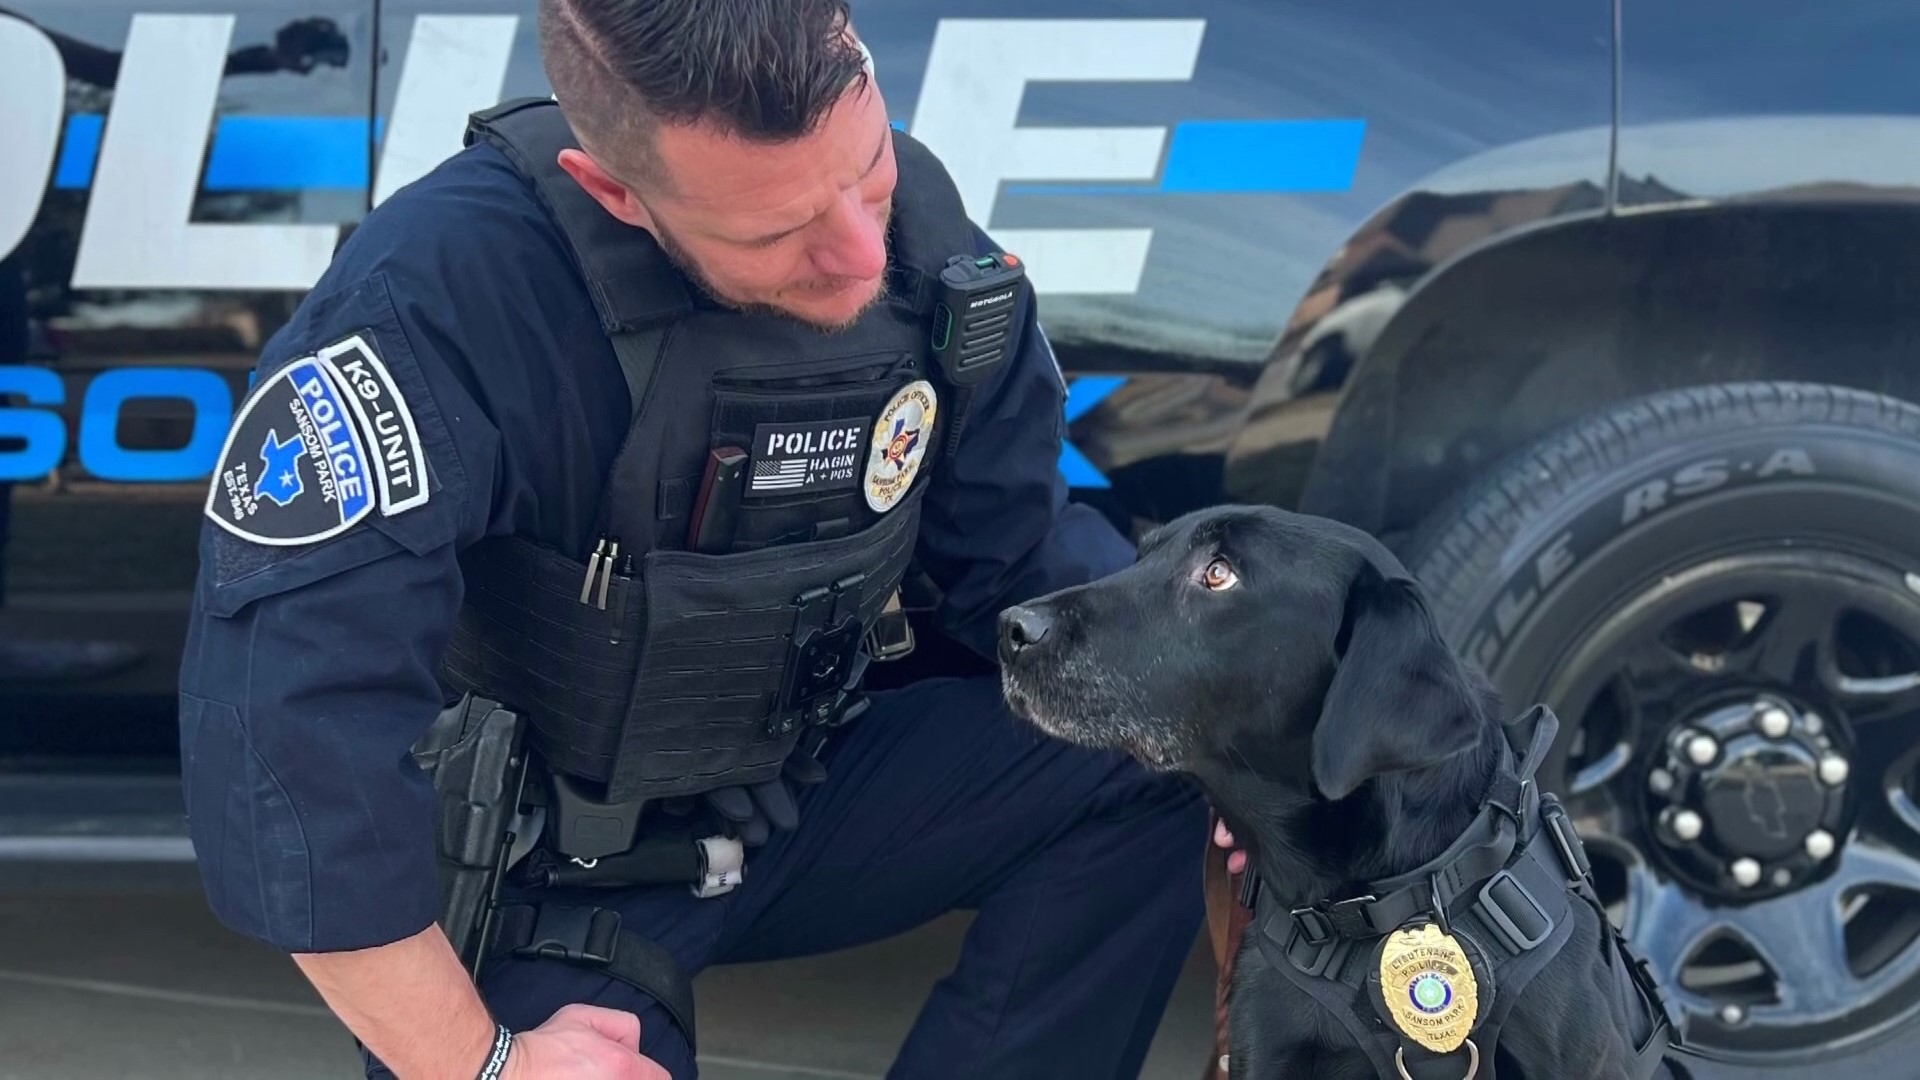 Police in Sansom Park, Texas, announced that K-9 officer Lt. Dan had passed away after a recent cancer diagnosis.